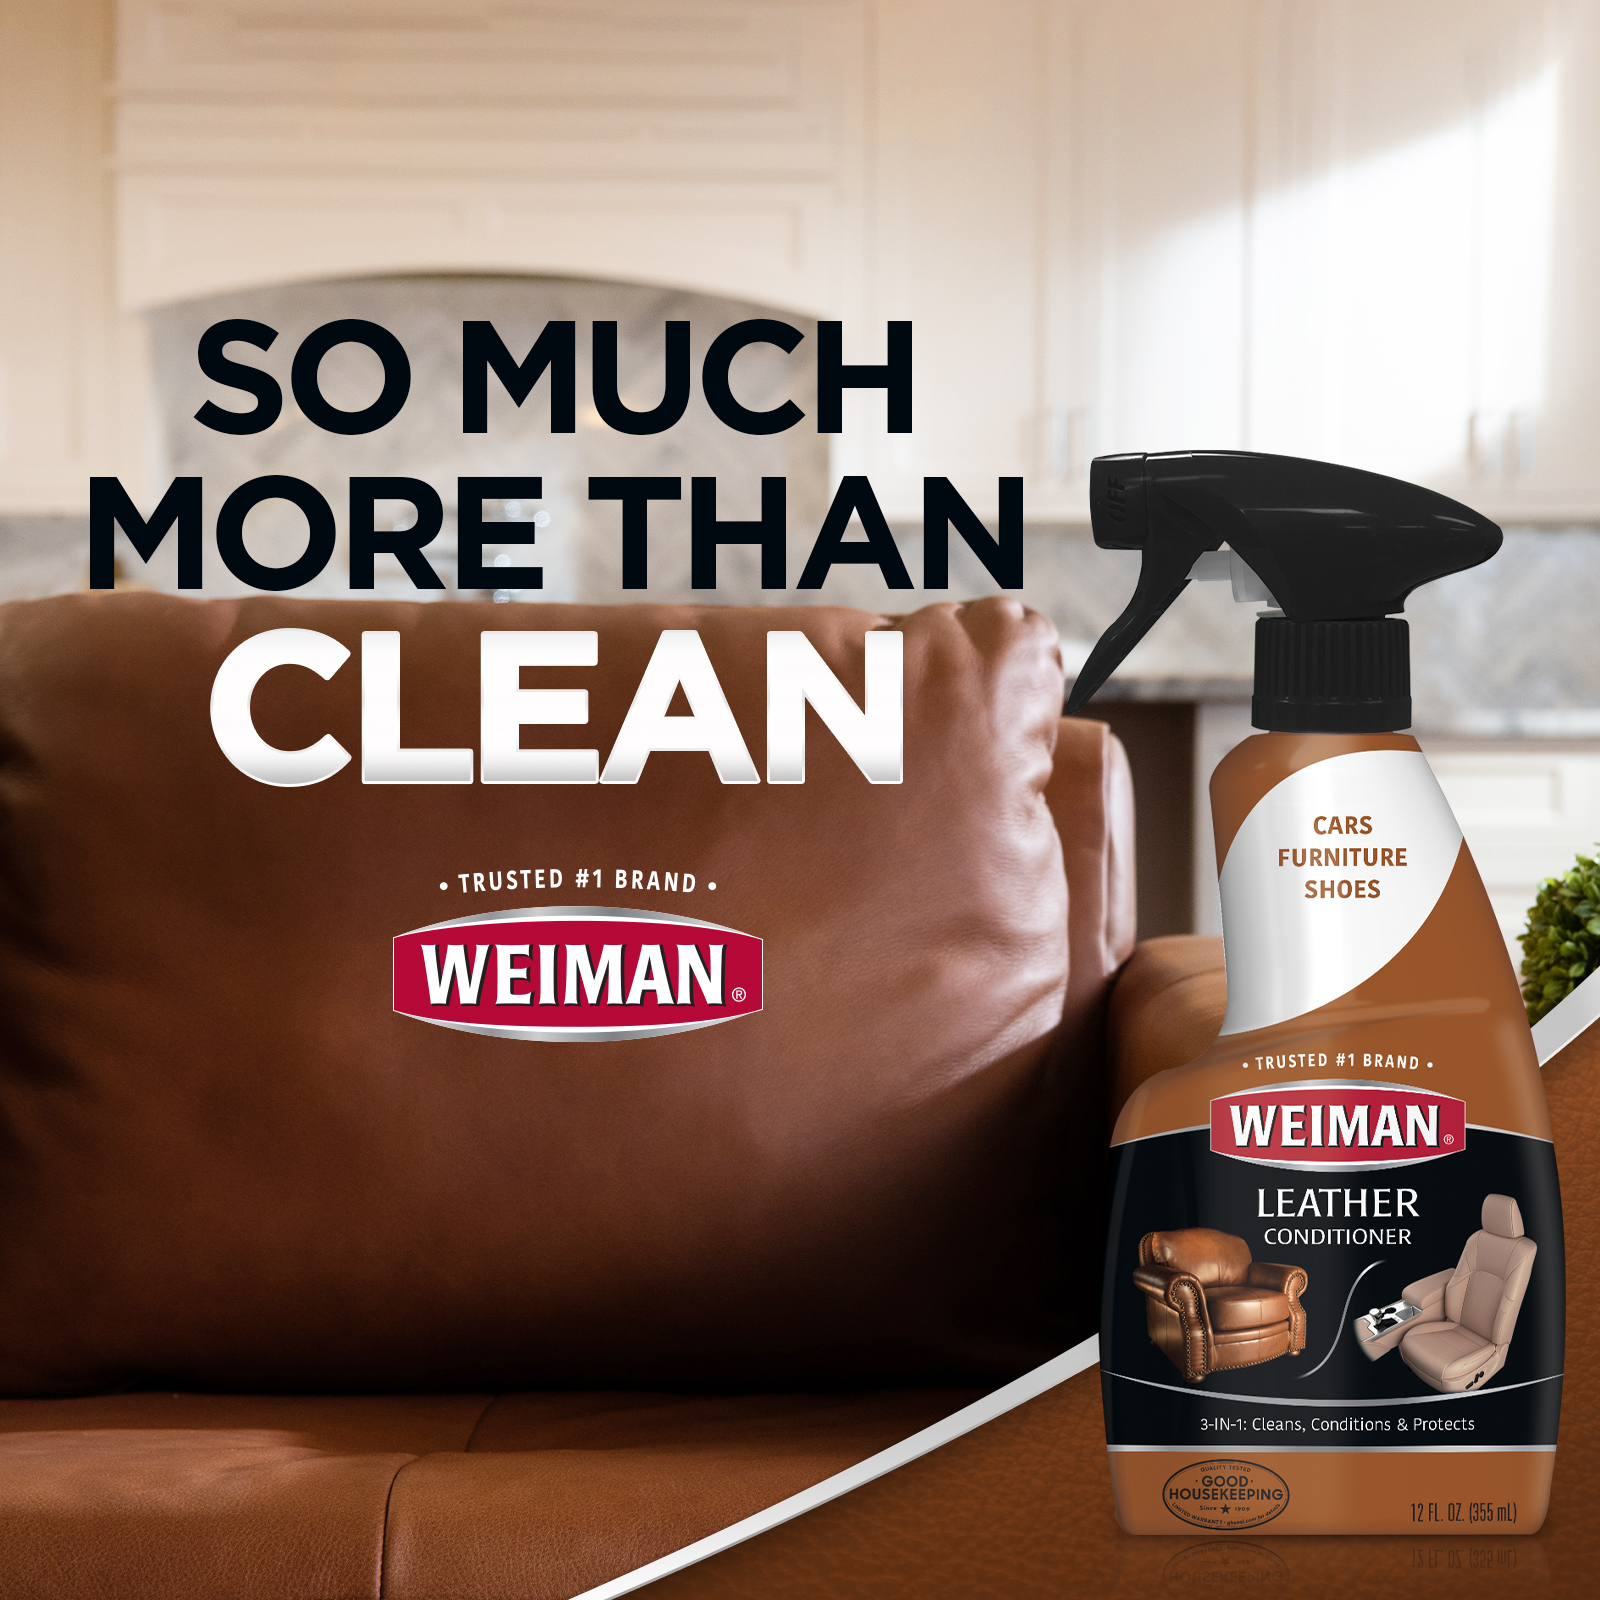 Weiman 3-1 Leather Cleaner & Conditioner for Furniture, Auto, Bags & Shoes, UVX Protection,16oz - image 6 of 8